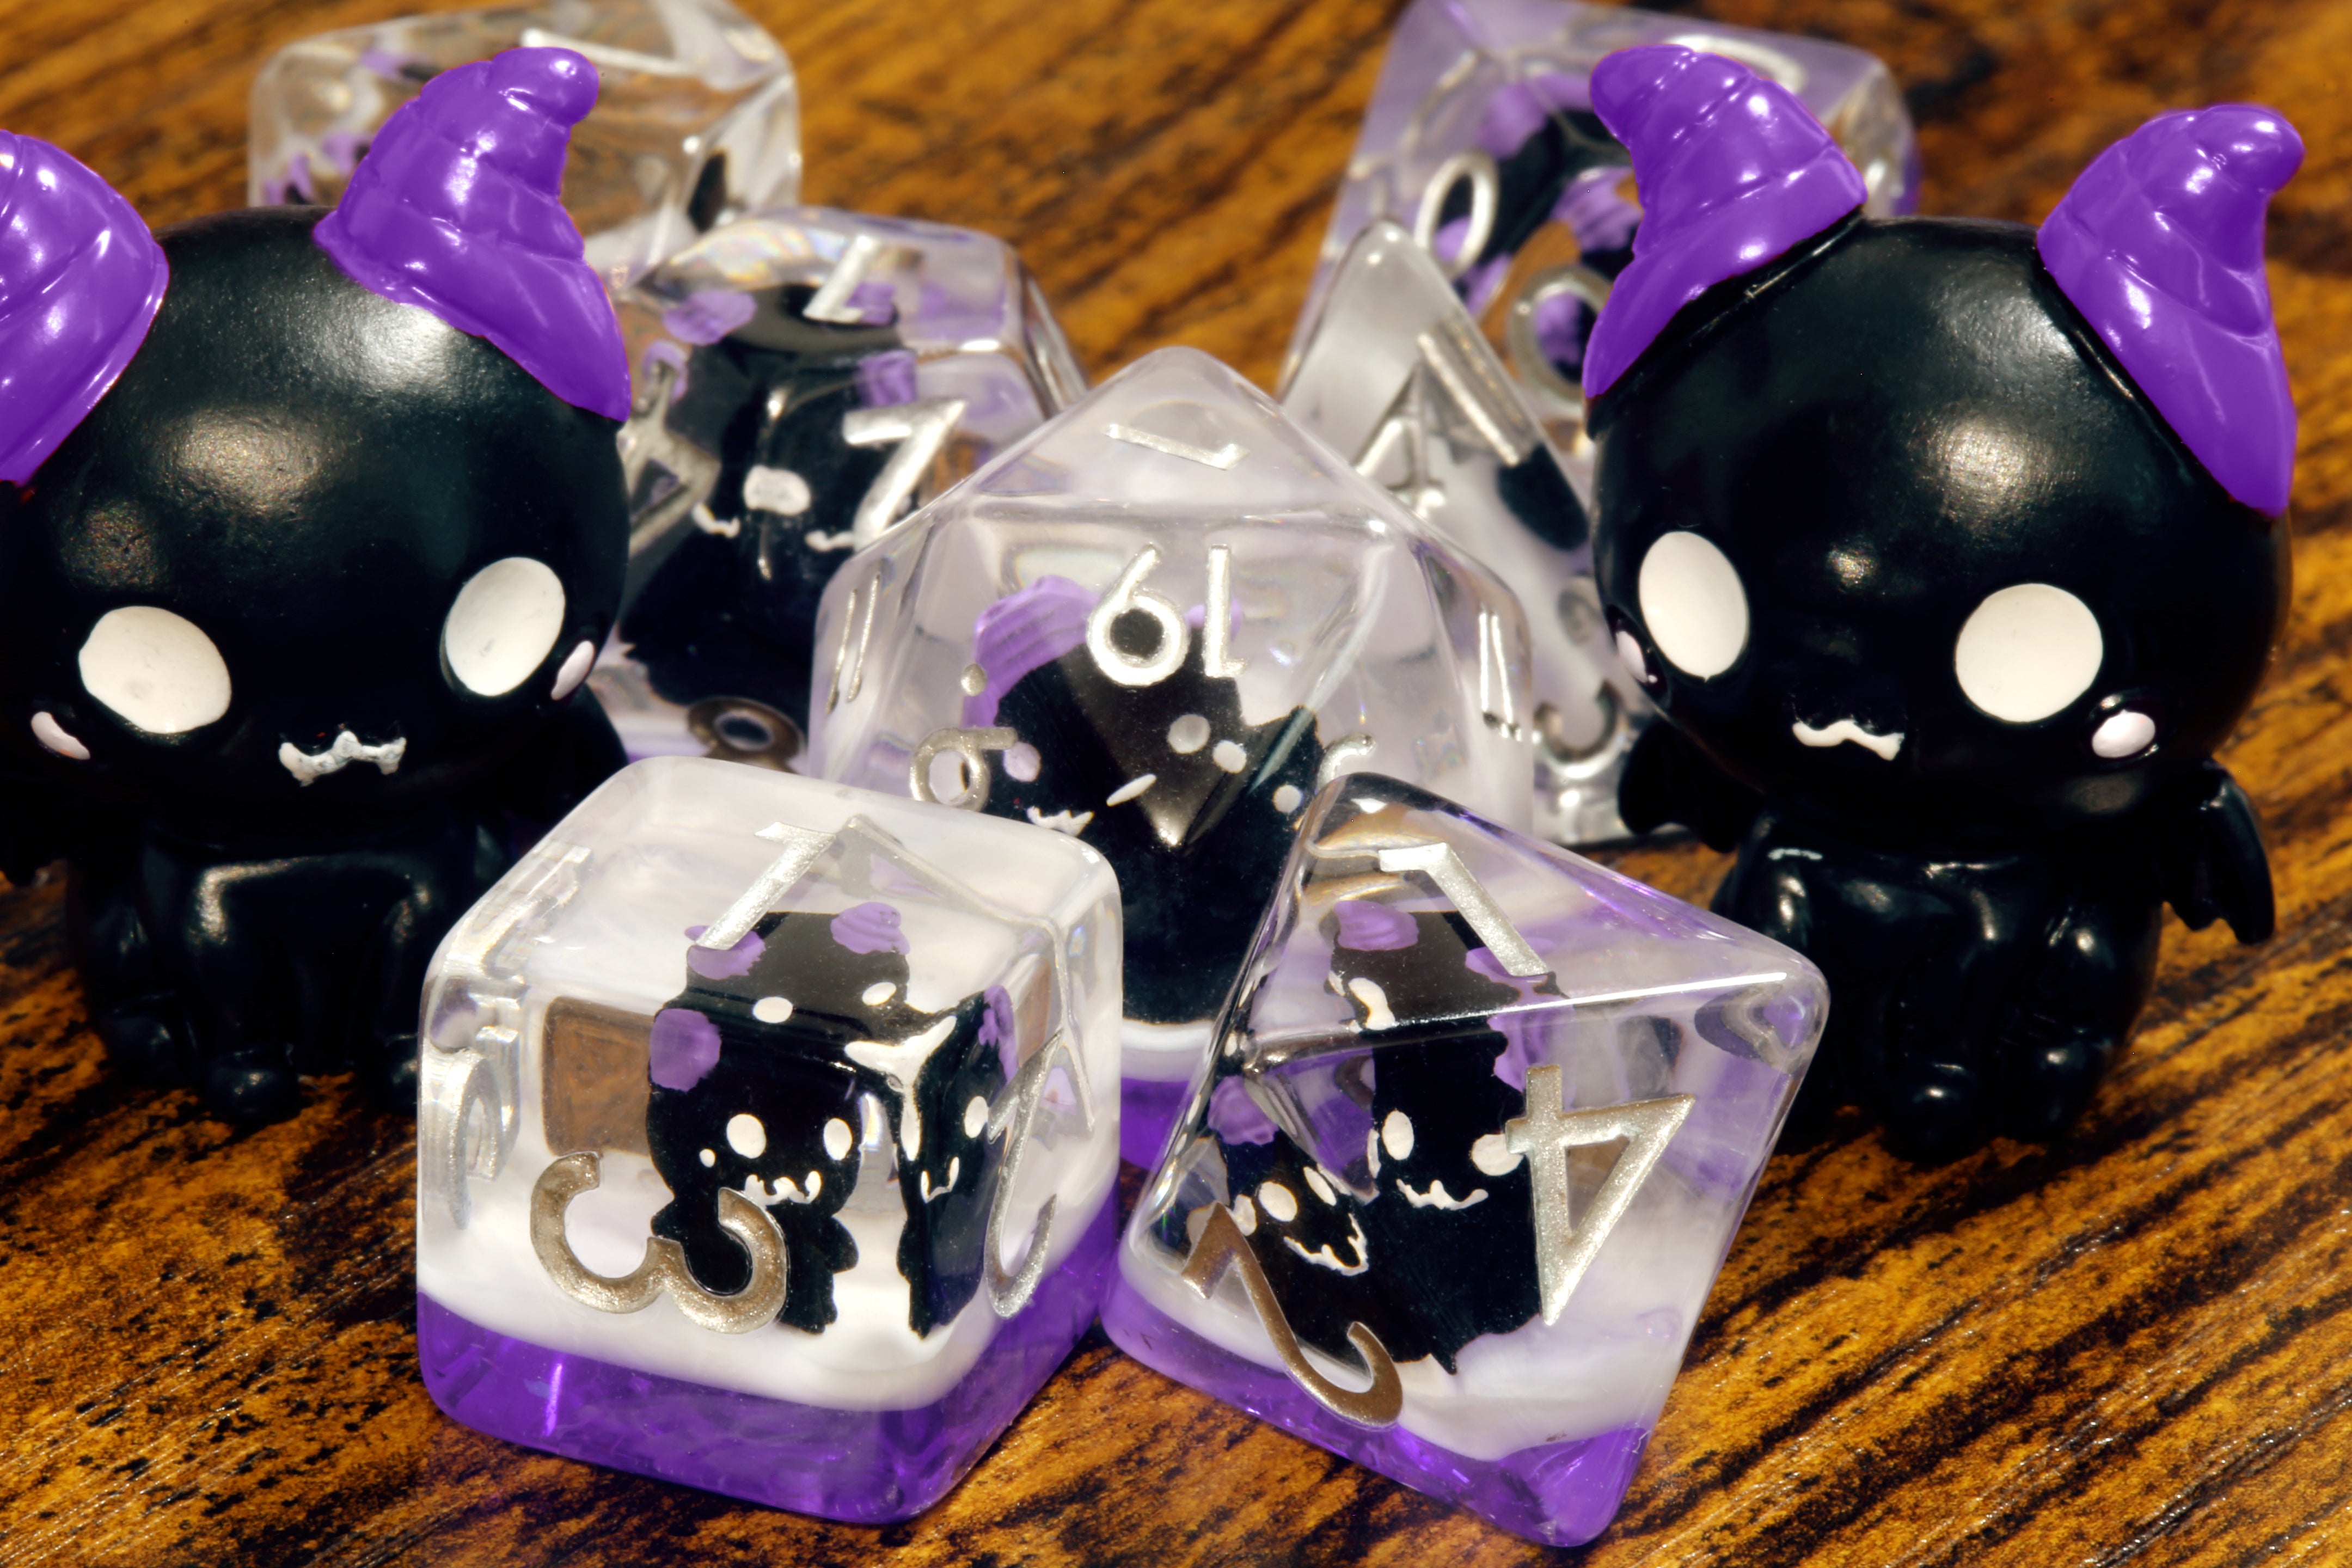 Cats of doom dice set - Dice set with winged cats on an purple layer - The Wizard's Vault